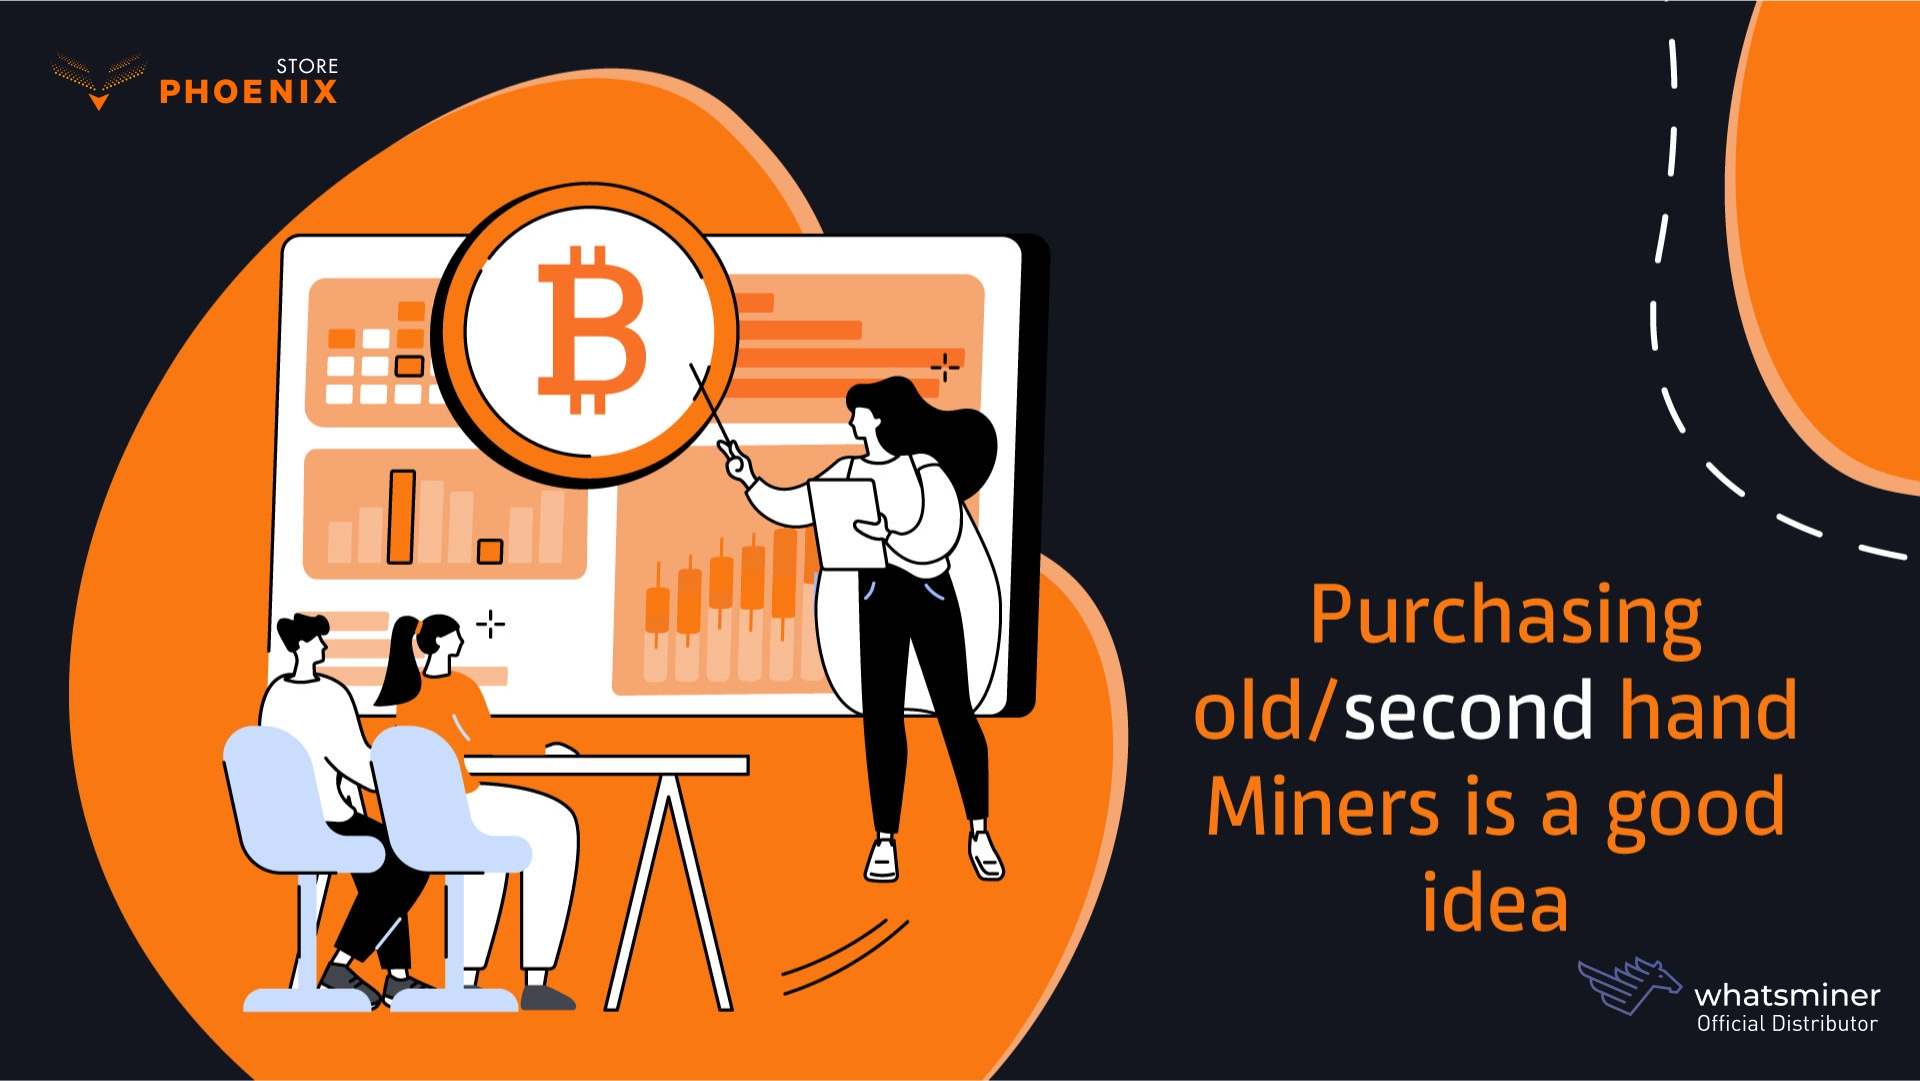 Is Purchasing Second Hand or Used Anminers a Good Idea?